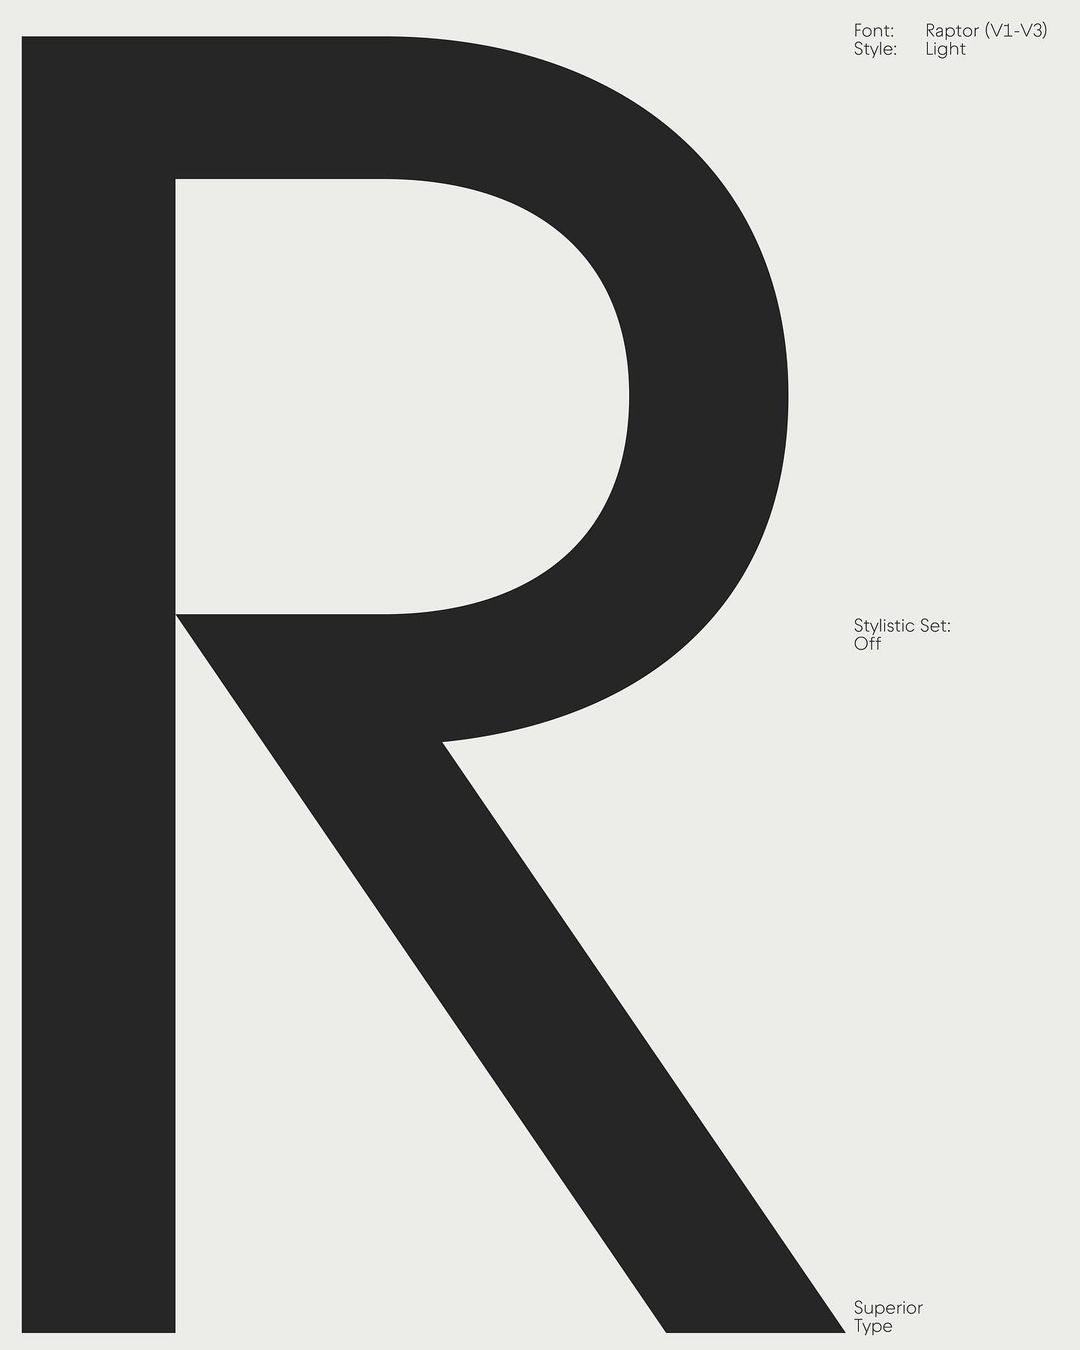 Rapter Font by Superior Type